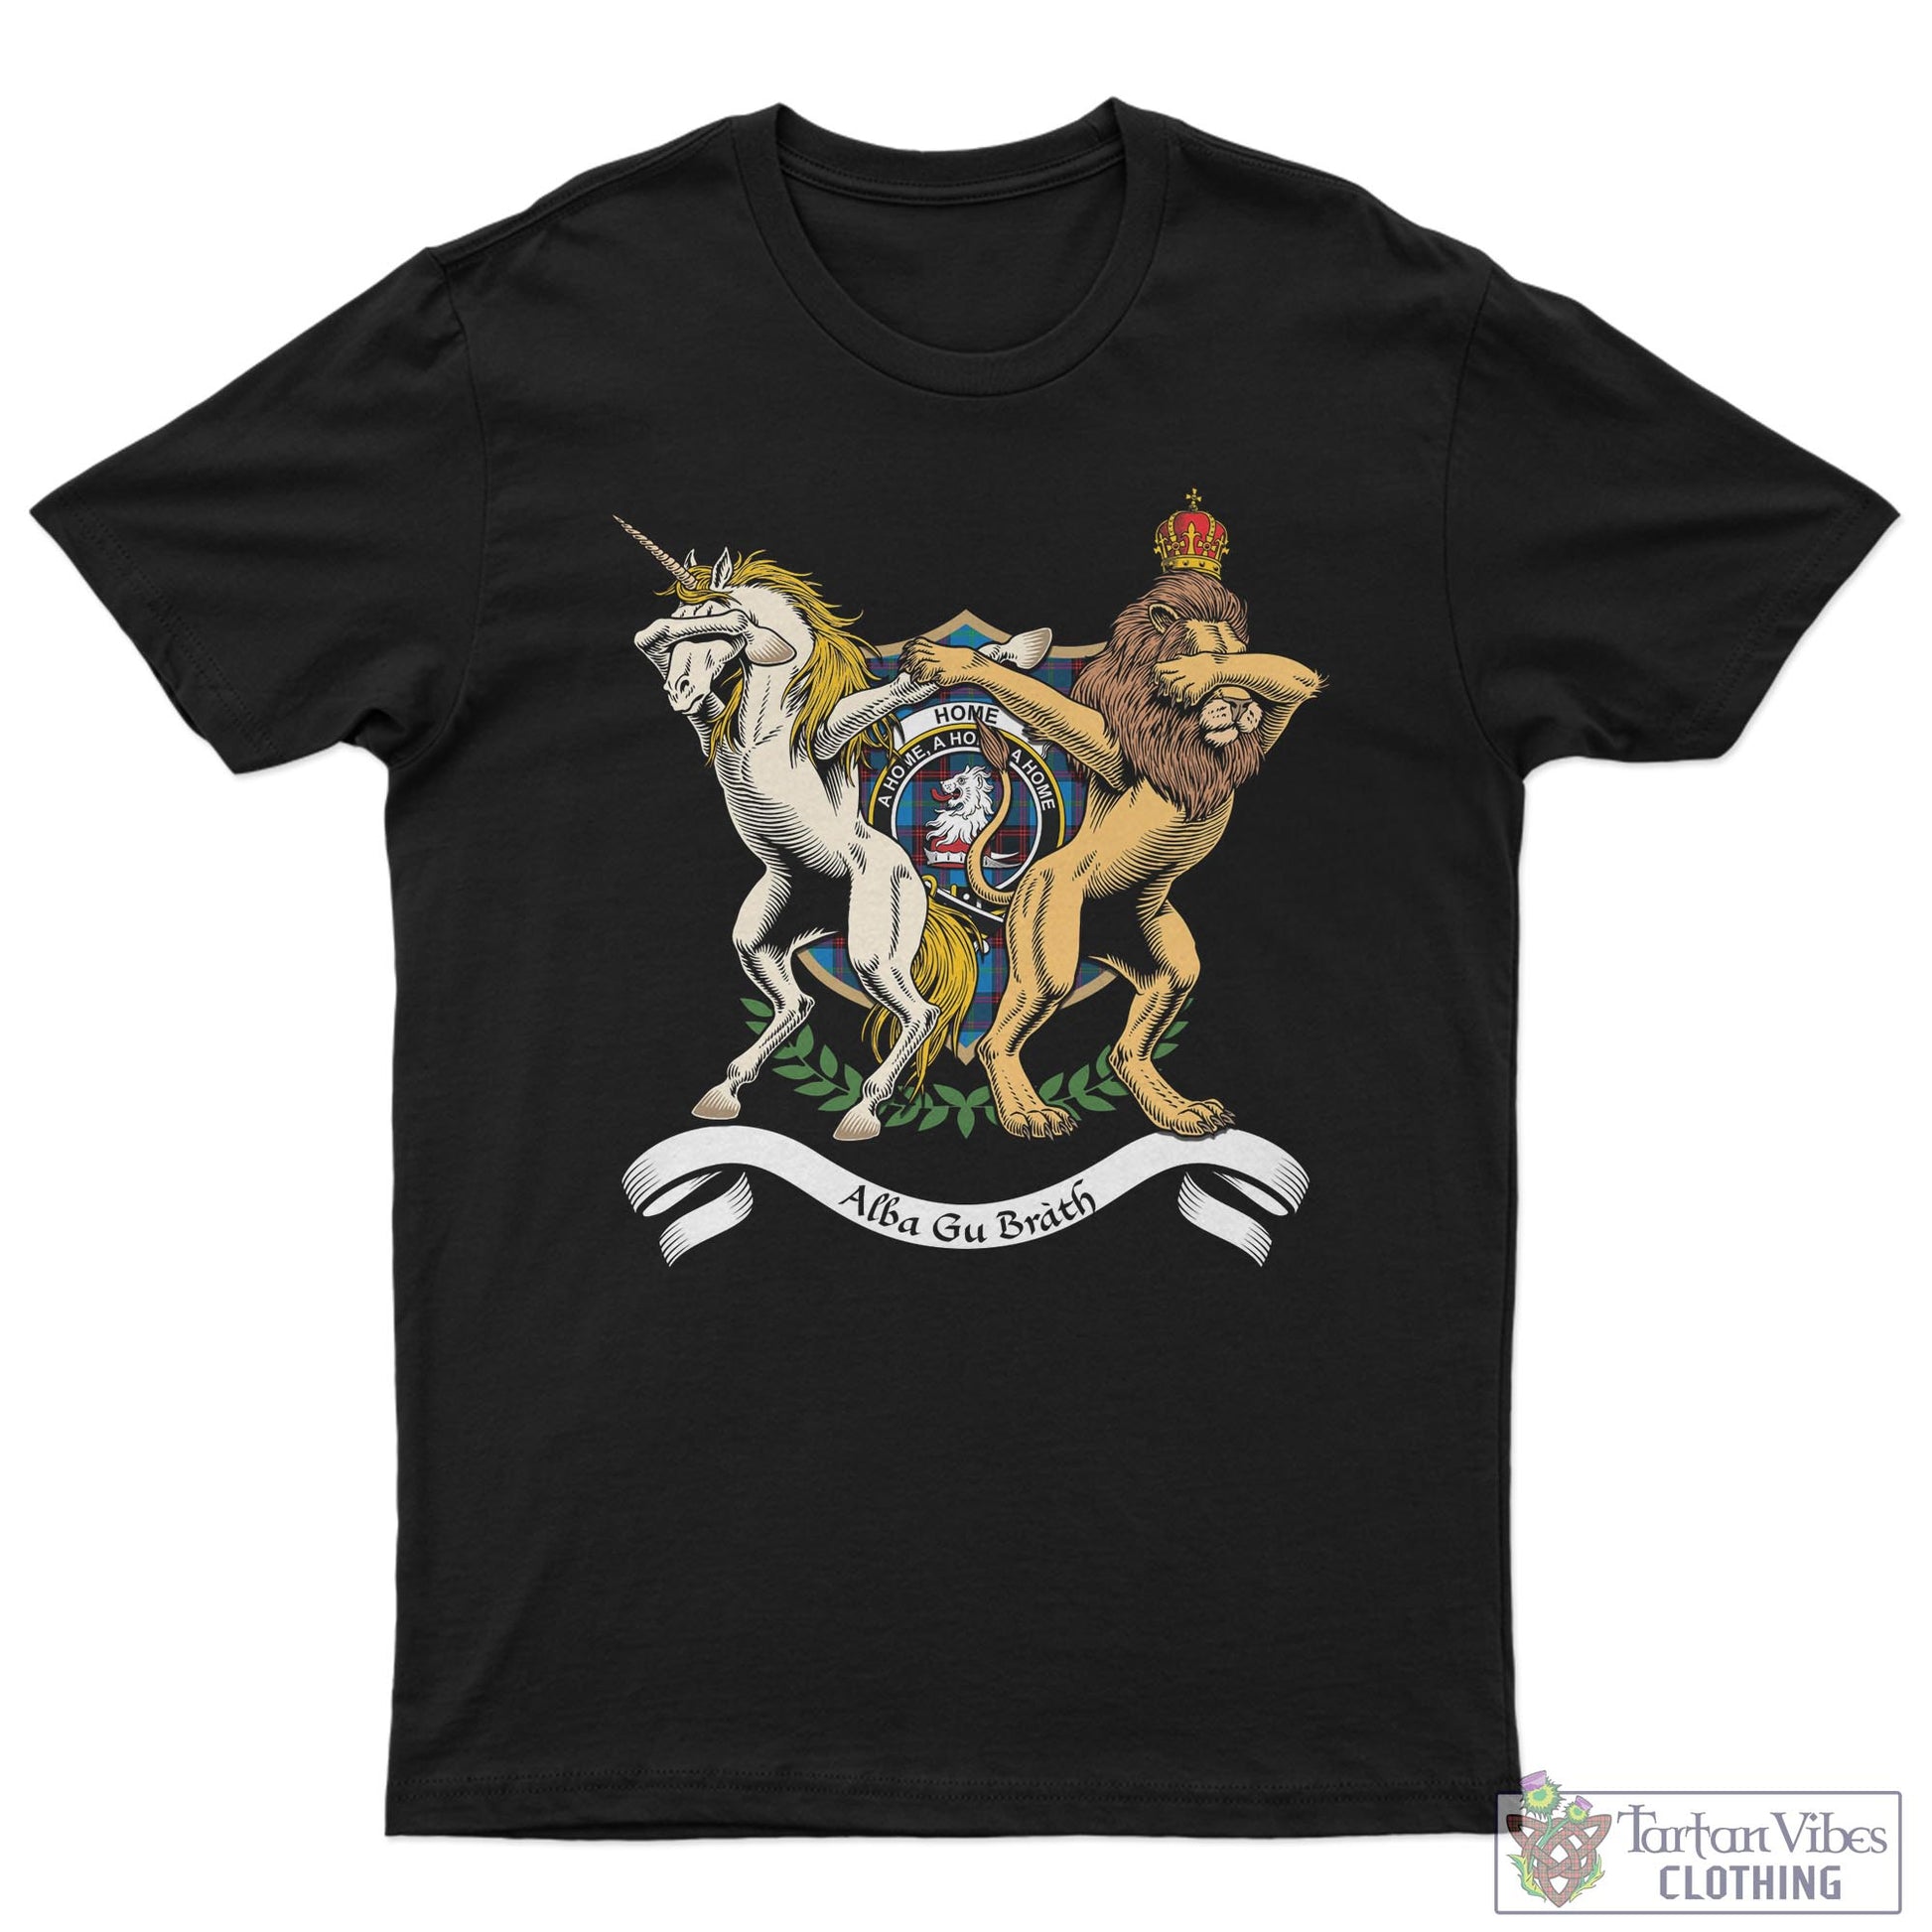 Tartan Vibes Clothing Home Ancient Family Crest Cotton Men's T-Shirt with Scotland Royal Coat Of Arm Funny Style